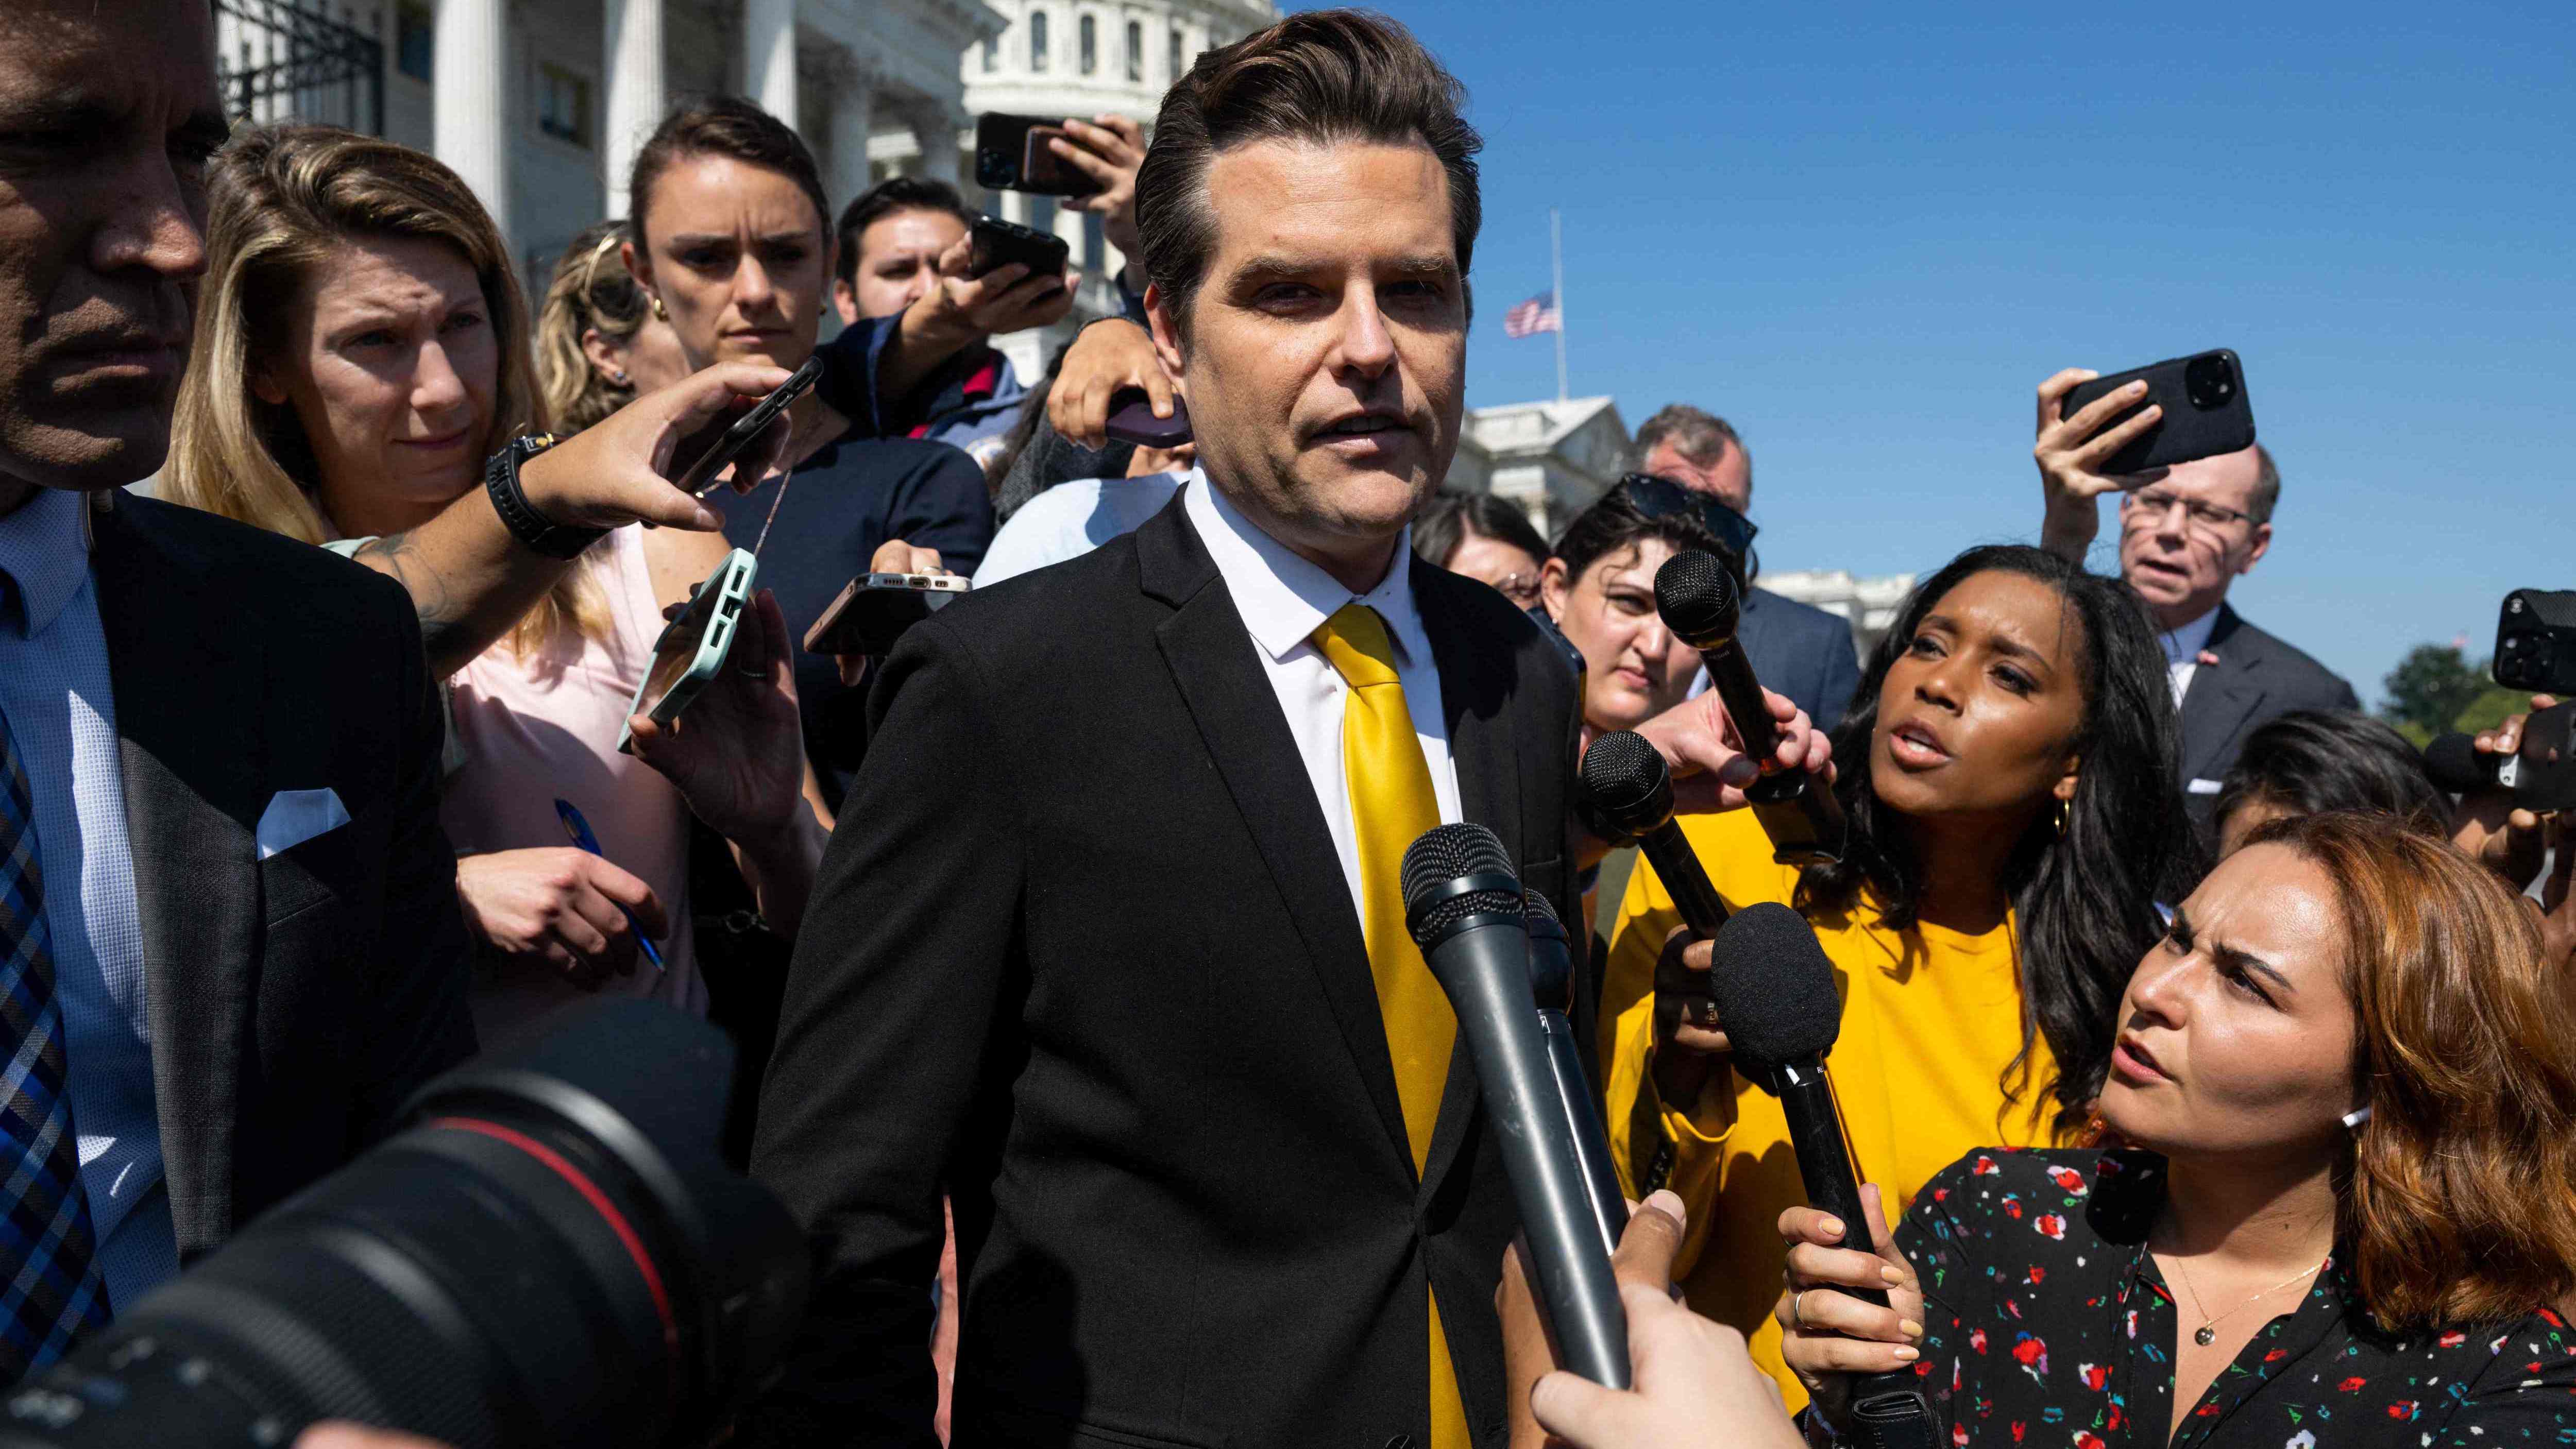 Matt Gaetz, a Republican member of congress from Florida, claimed almost $30,000 for accommodation and $10,000 for meals despite railing against wasteful spending of taxpayers’ money